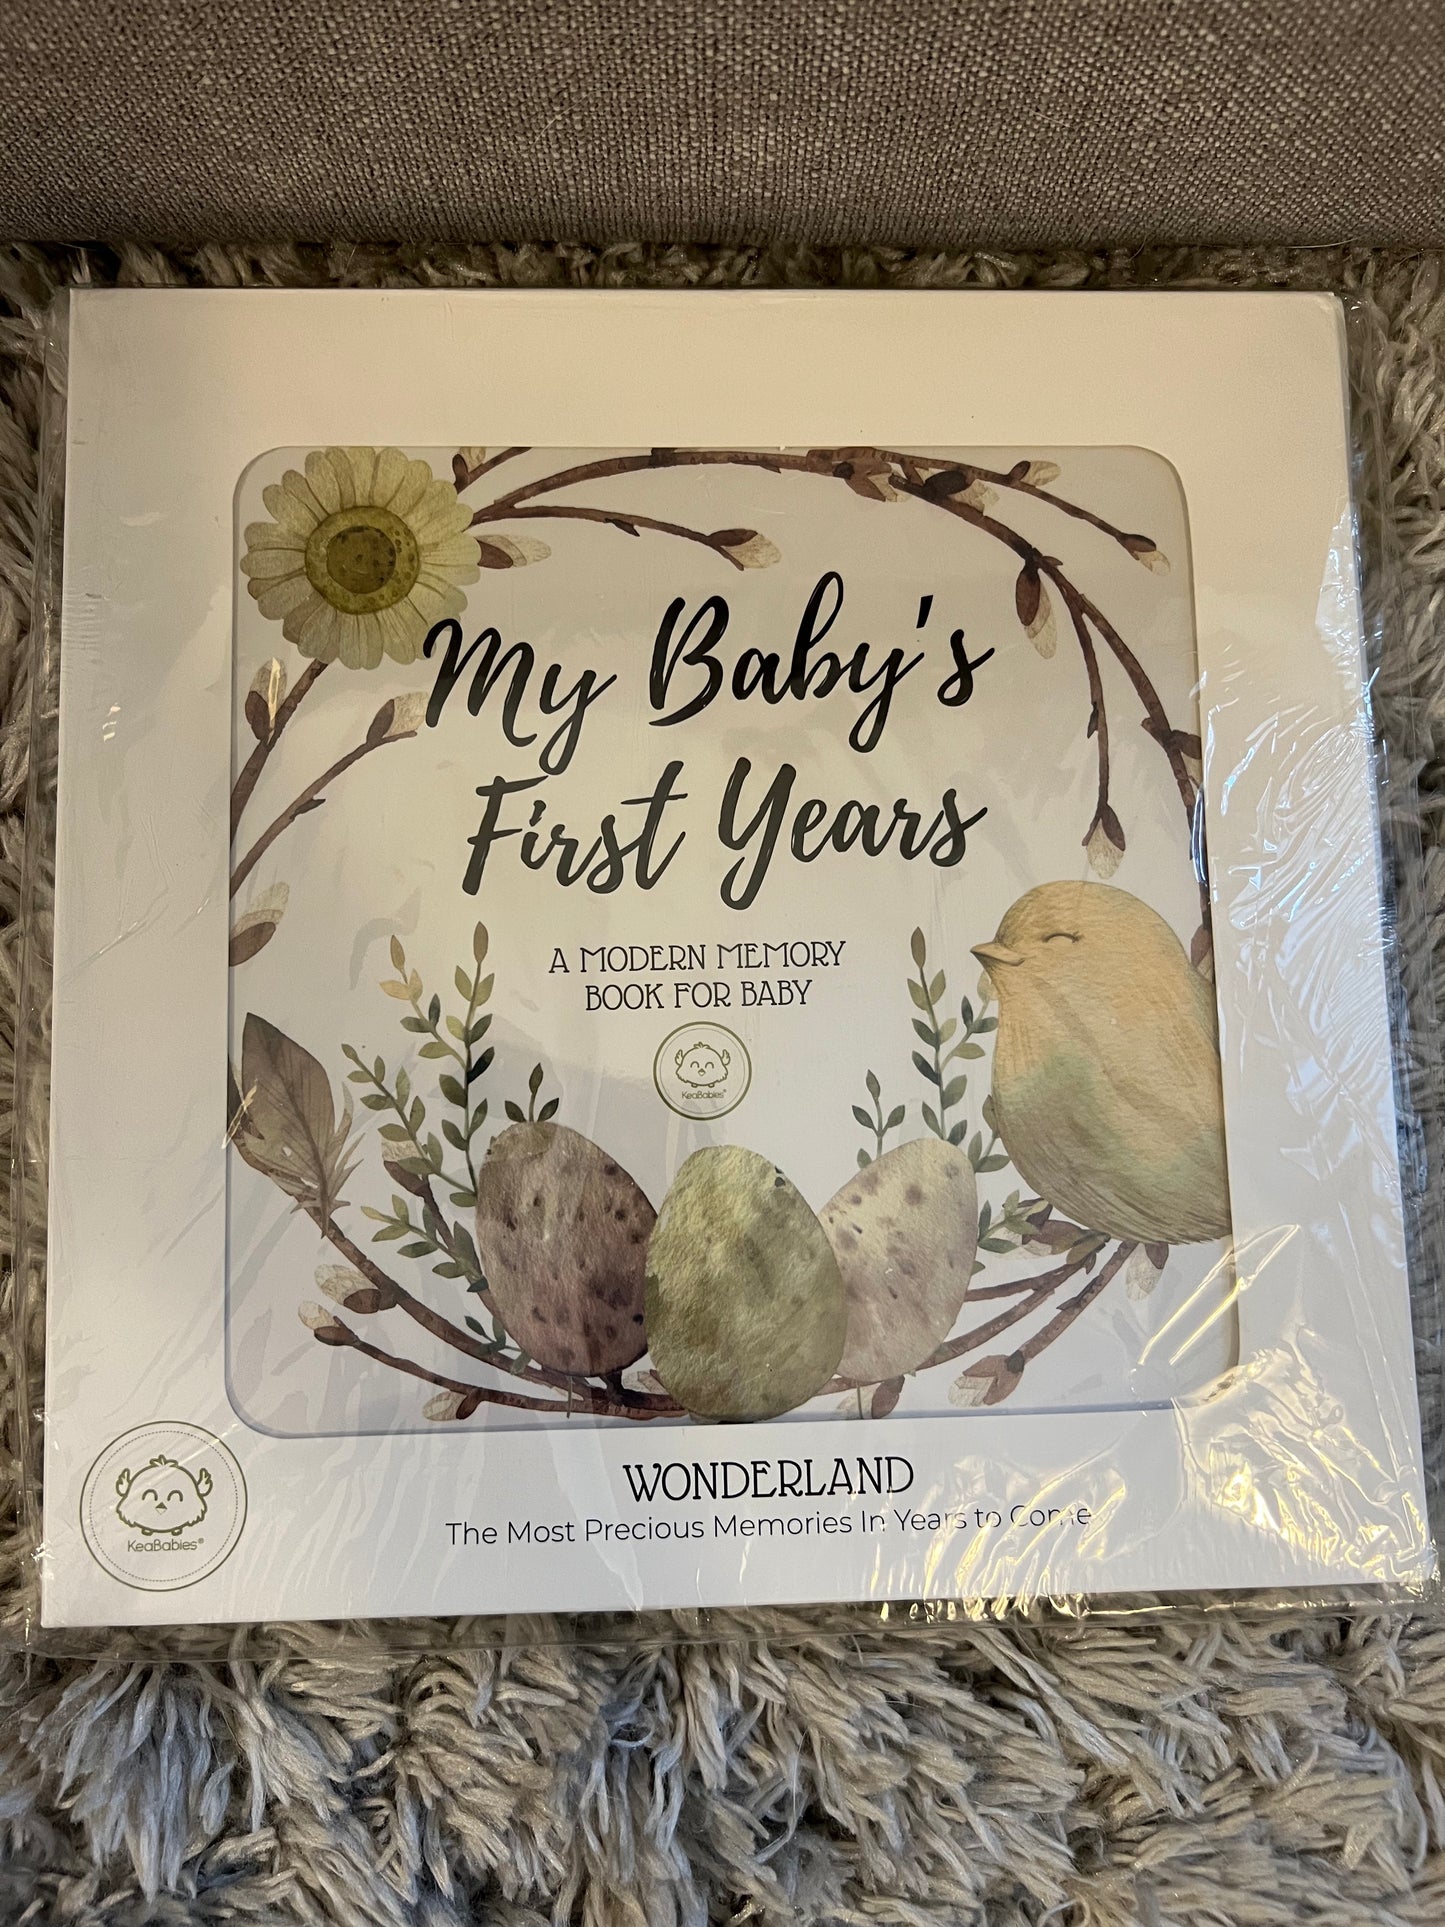 New KeaBabies My Baby's First Years Memory Book PPU 45208 or Spring Sale